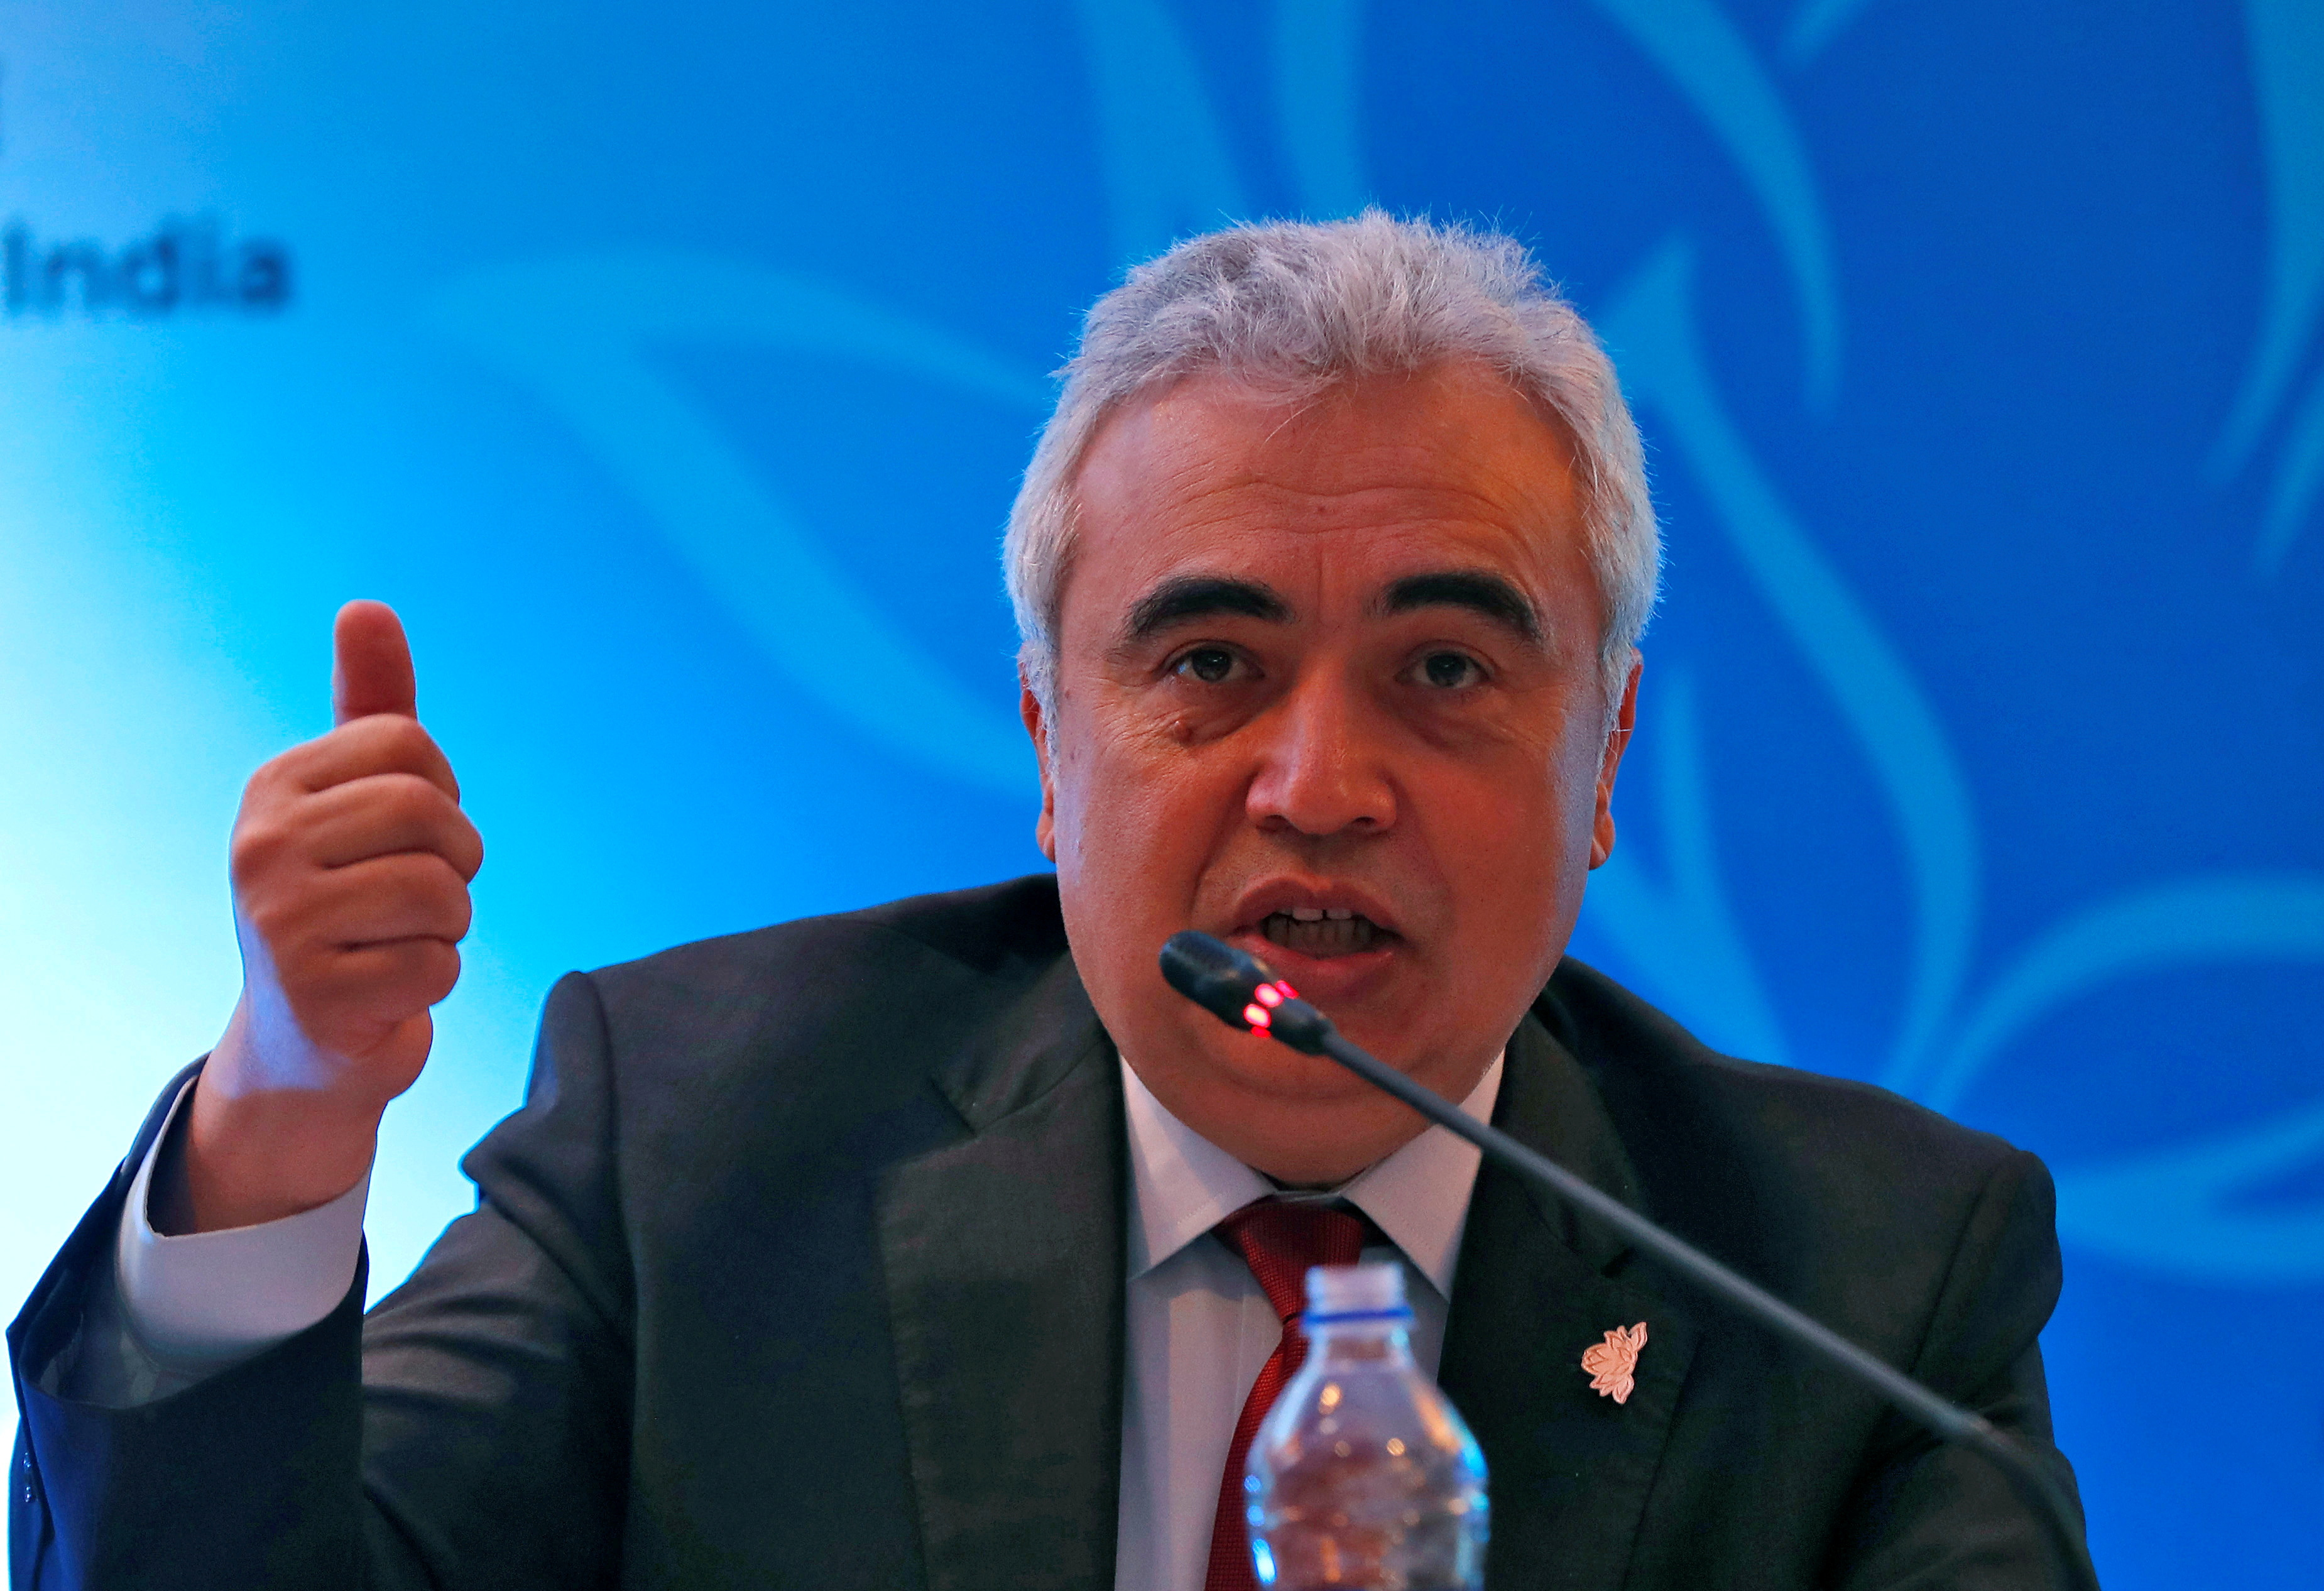 IEA chief says price cap on Russian oil should include refined products | Reuters